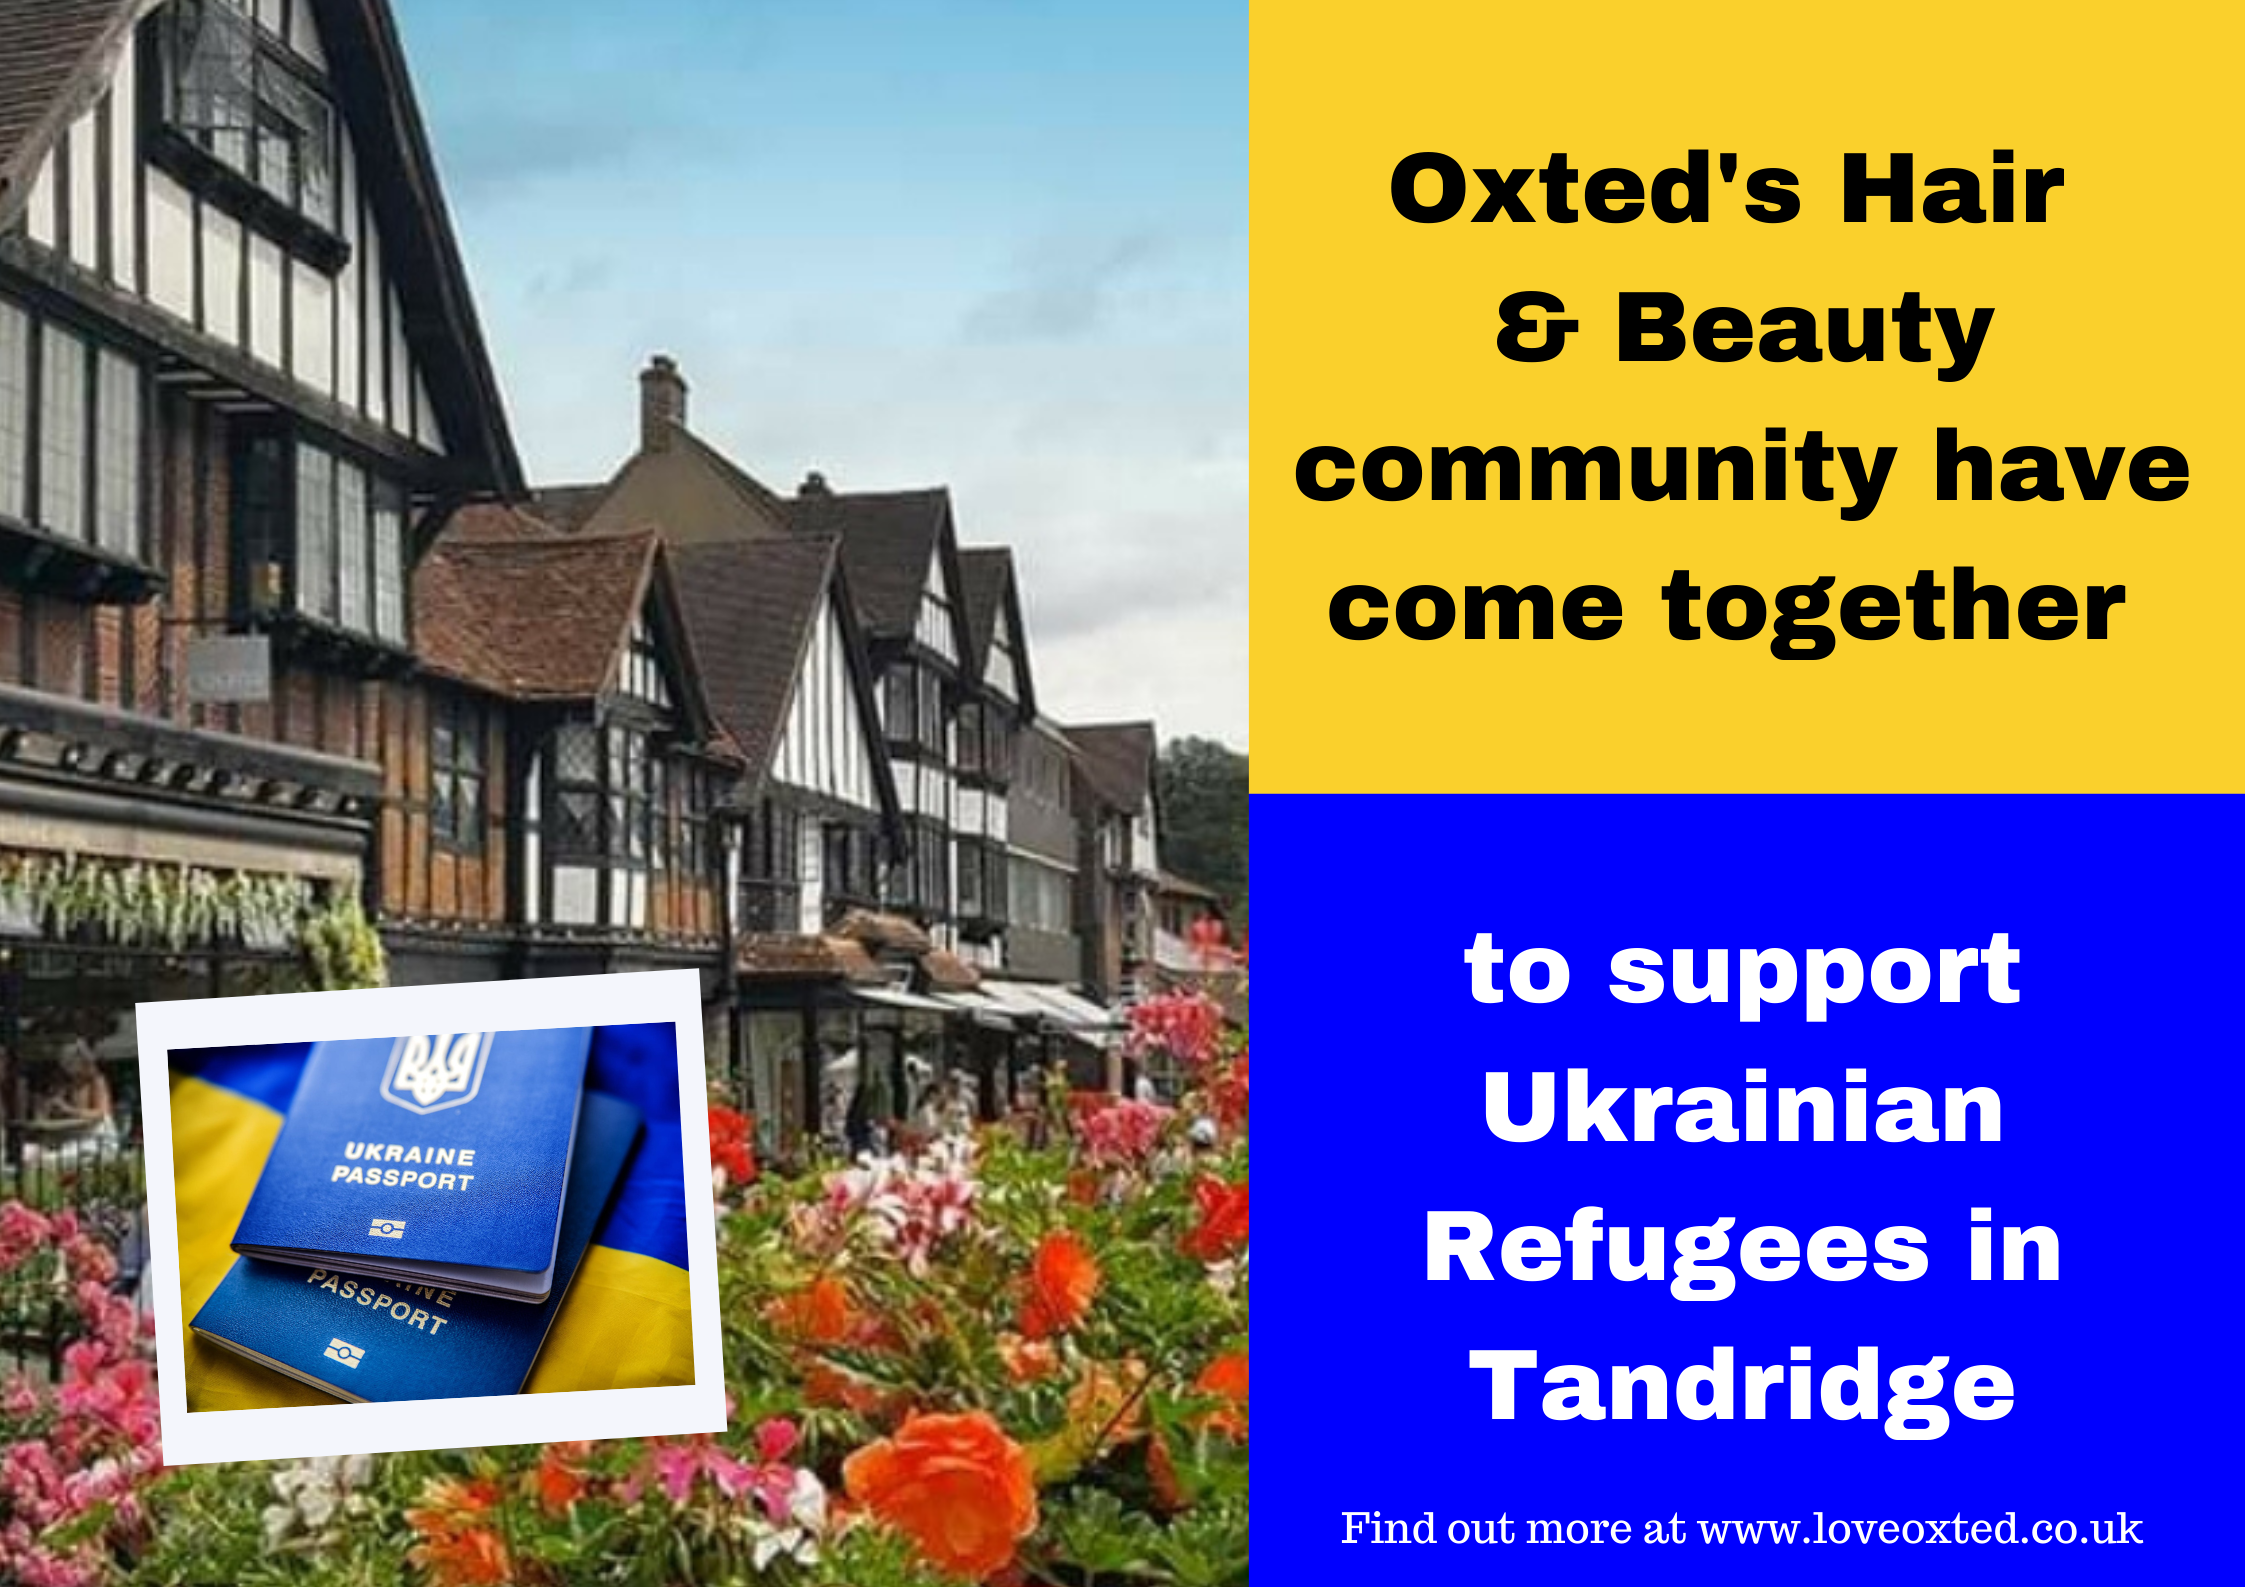 Oxted Hair and Beauty Businesses come together to support Ukrainian Refugees